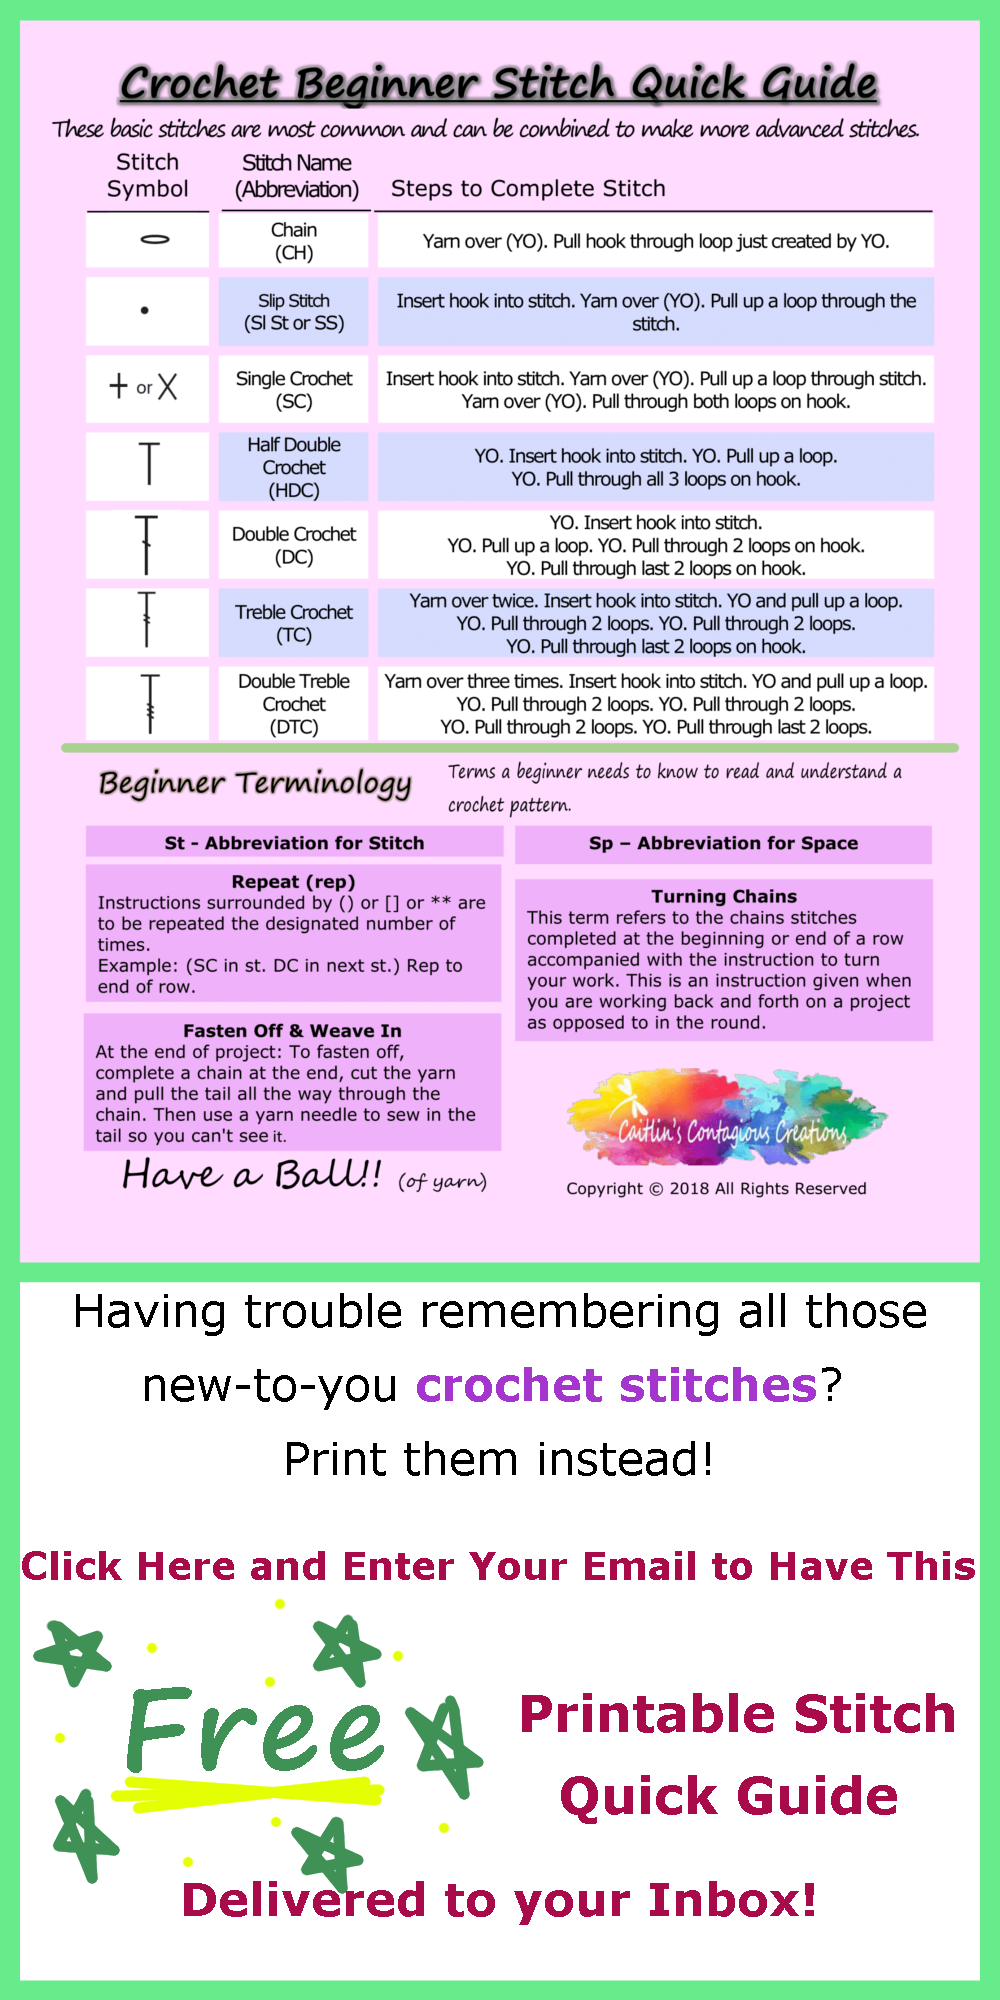 This beginner crochet stitch quick guide free printable pdf is available from Caitlin's Contagious Creations. Have this mini tutorial emailed to you today!